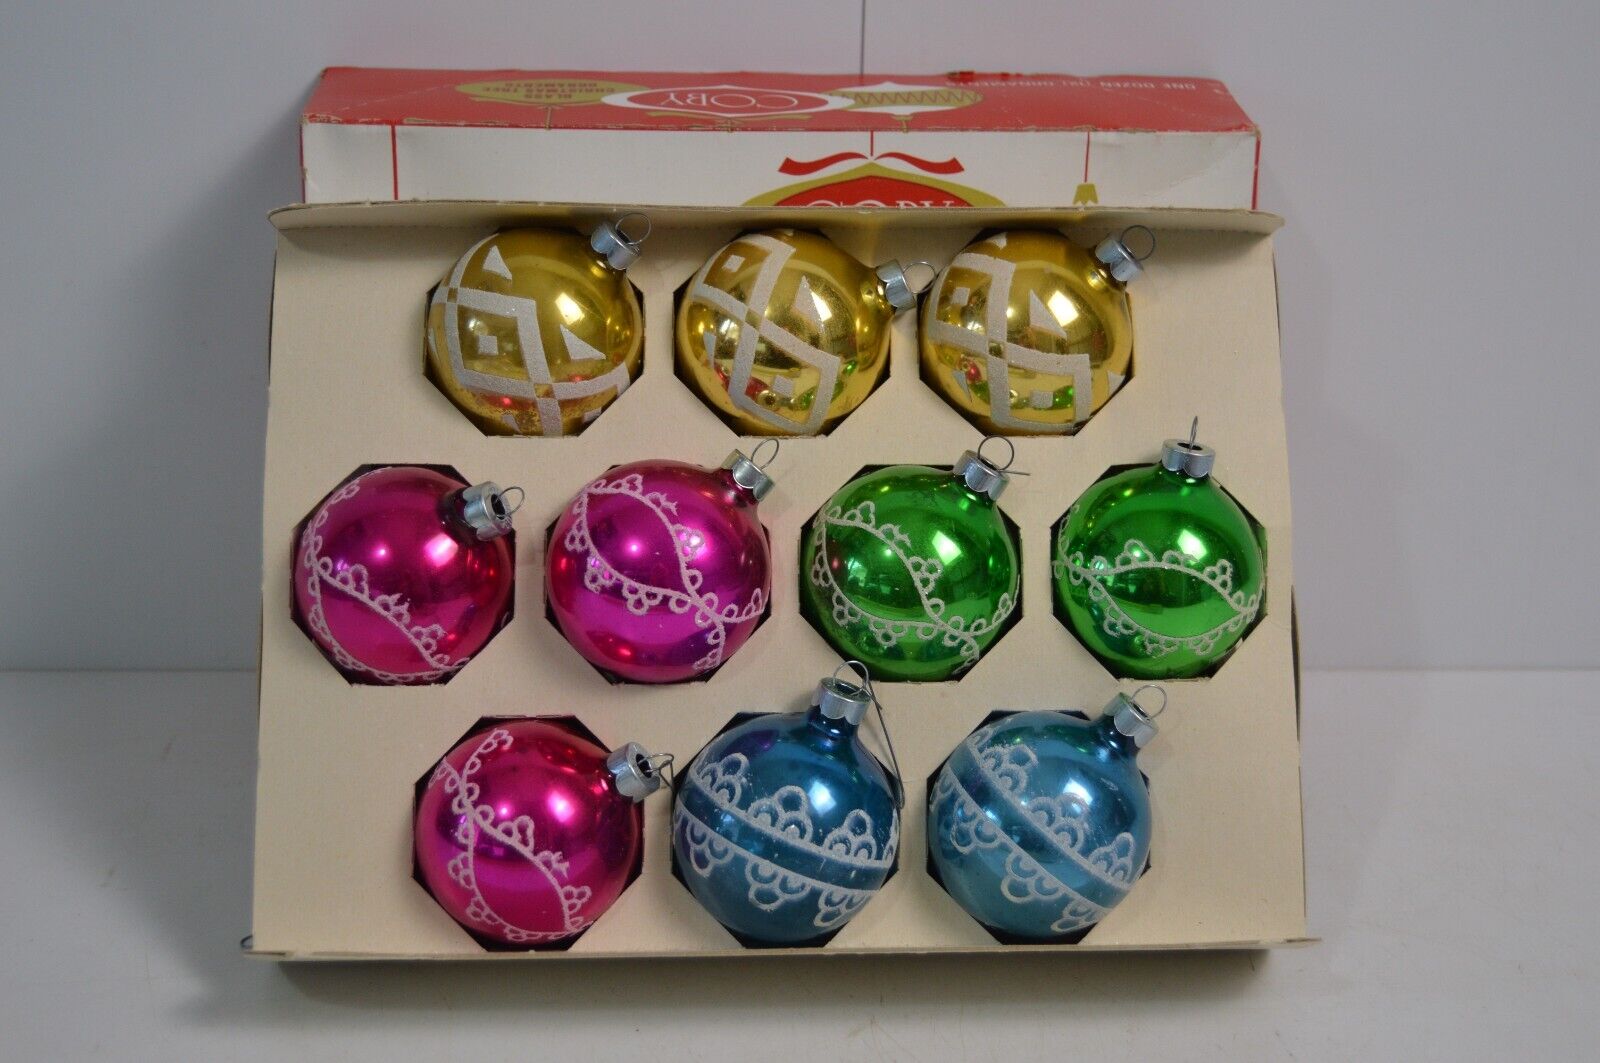 12 Vintage Coby Glass Christmas Tree Ornaments With Box Glitter Lace Geometrics